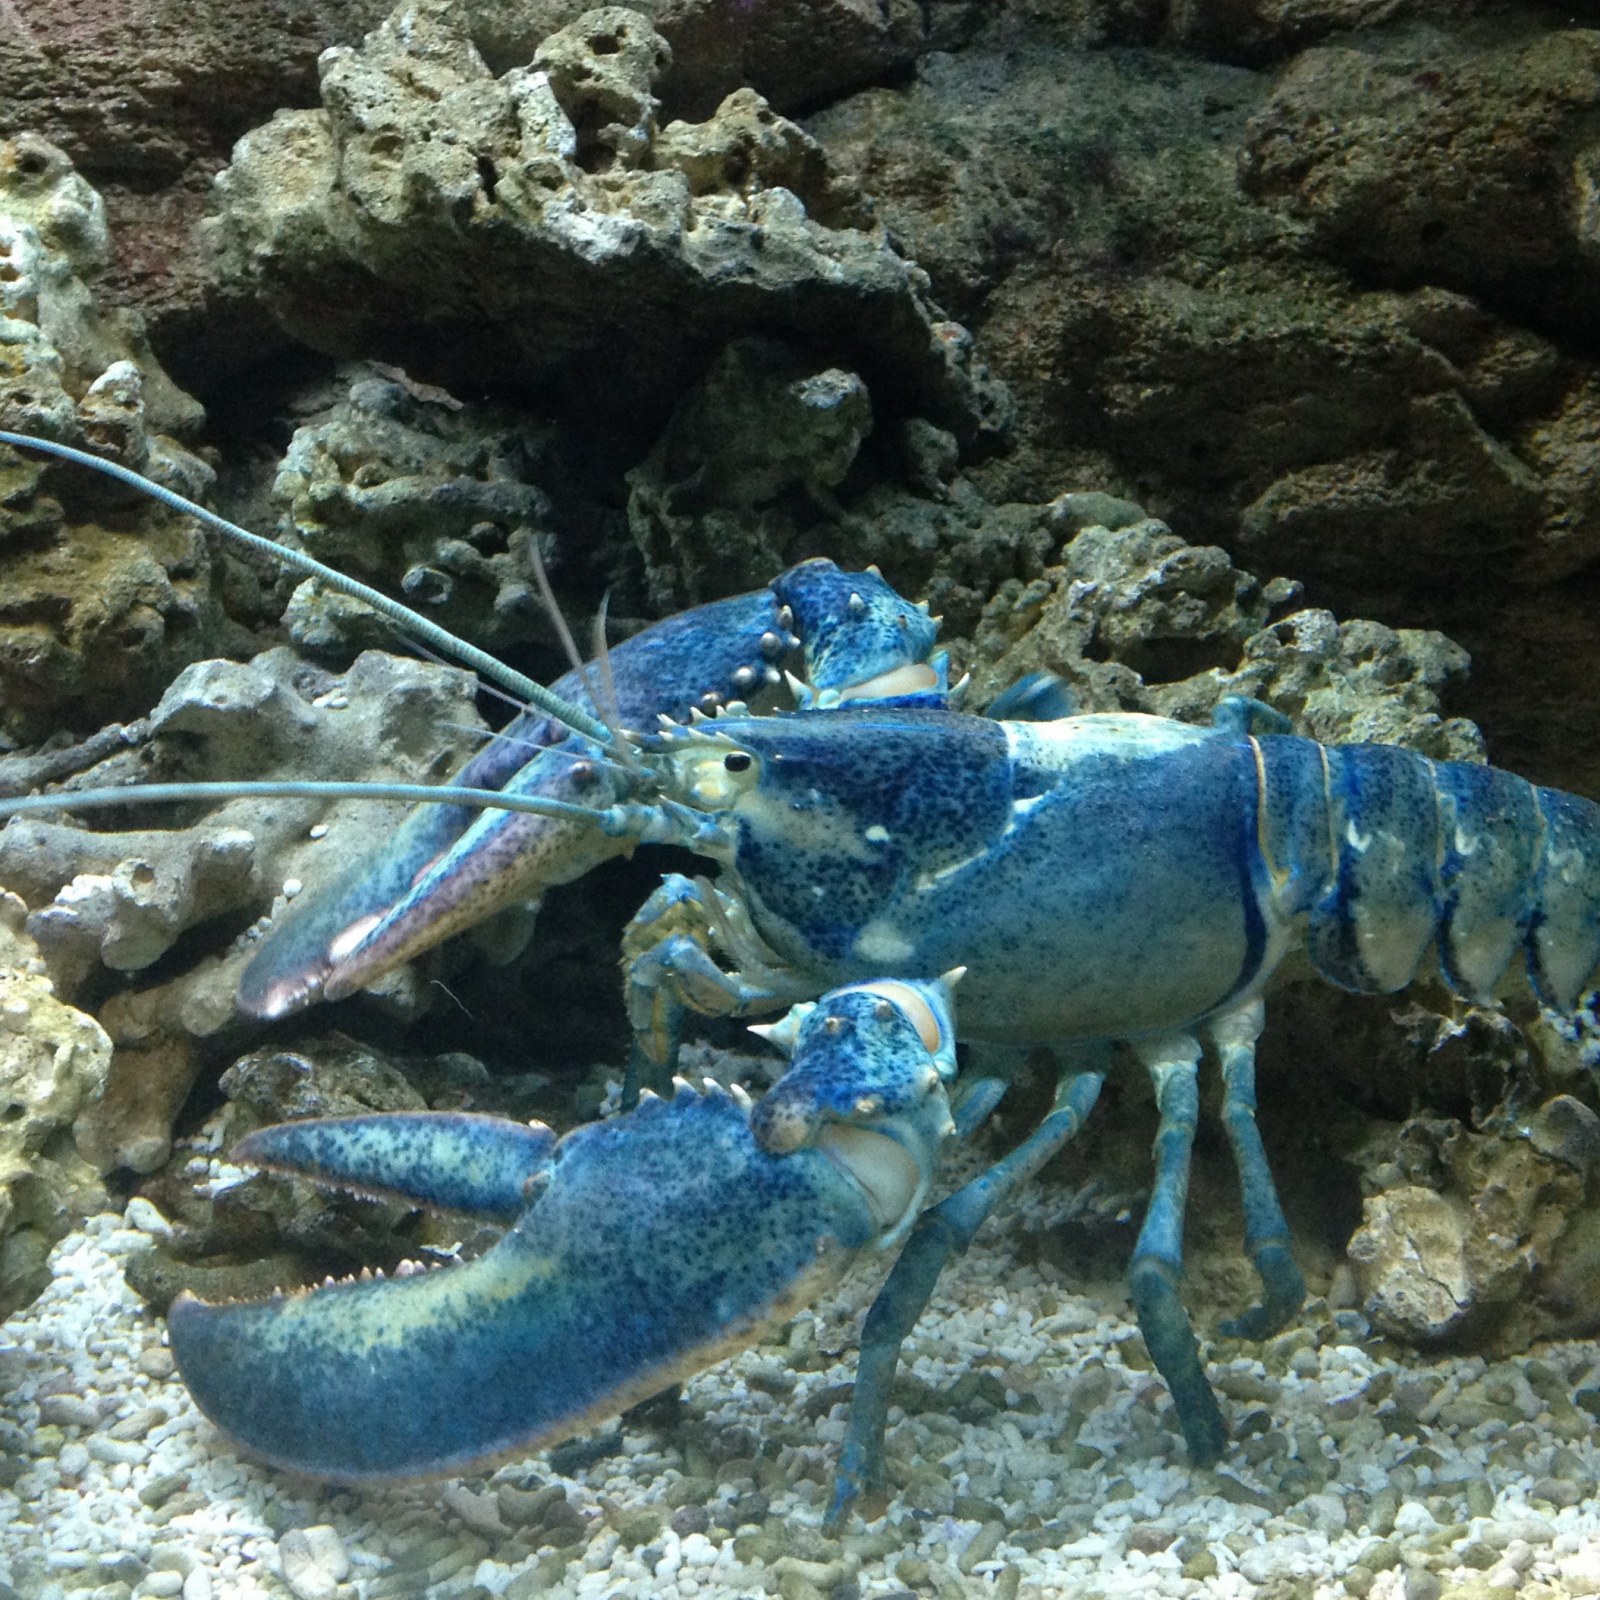 Fisherman Catches Rare Blue Lobster: 'Would Be a Shame to Put It in a Pot'